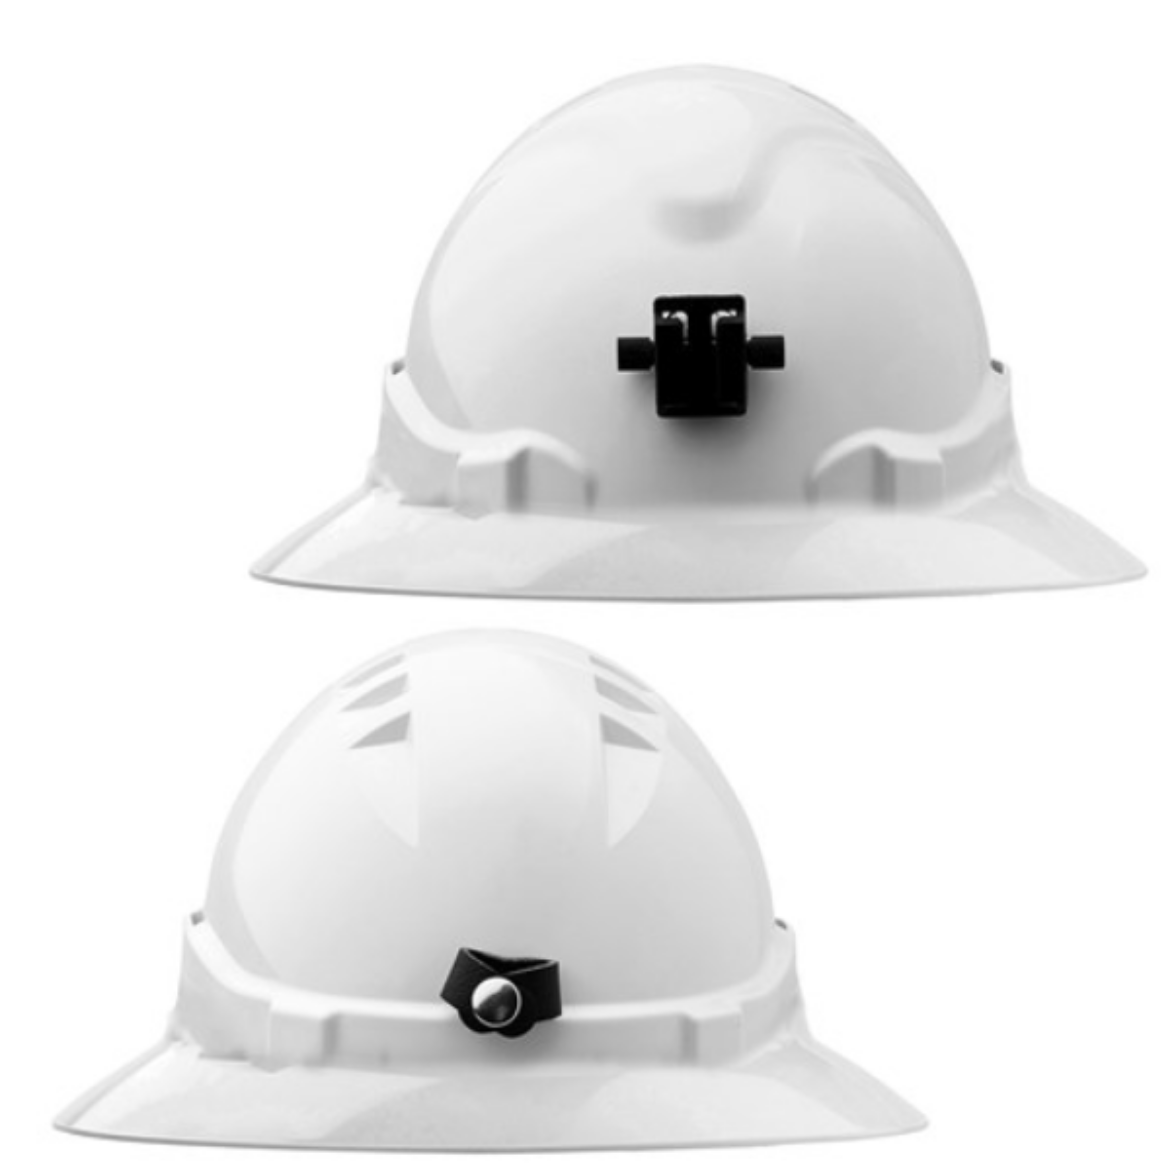 Picture of HARD HAT (V6) - UNVENTED, FULL BRIM, 6 POINT RATCHET HARNESS C/W LAMP BRACKET. AVAILABLE IN WHITE OR YELLOW